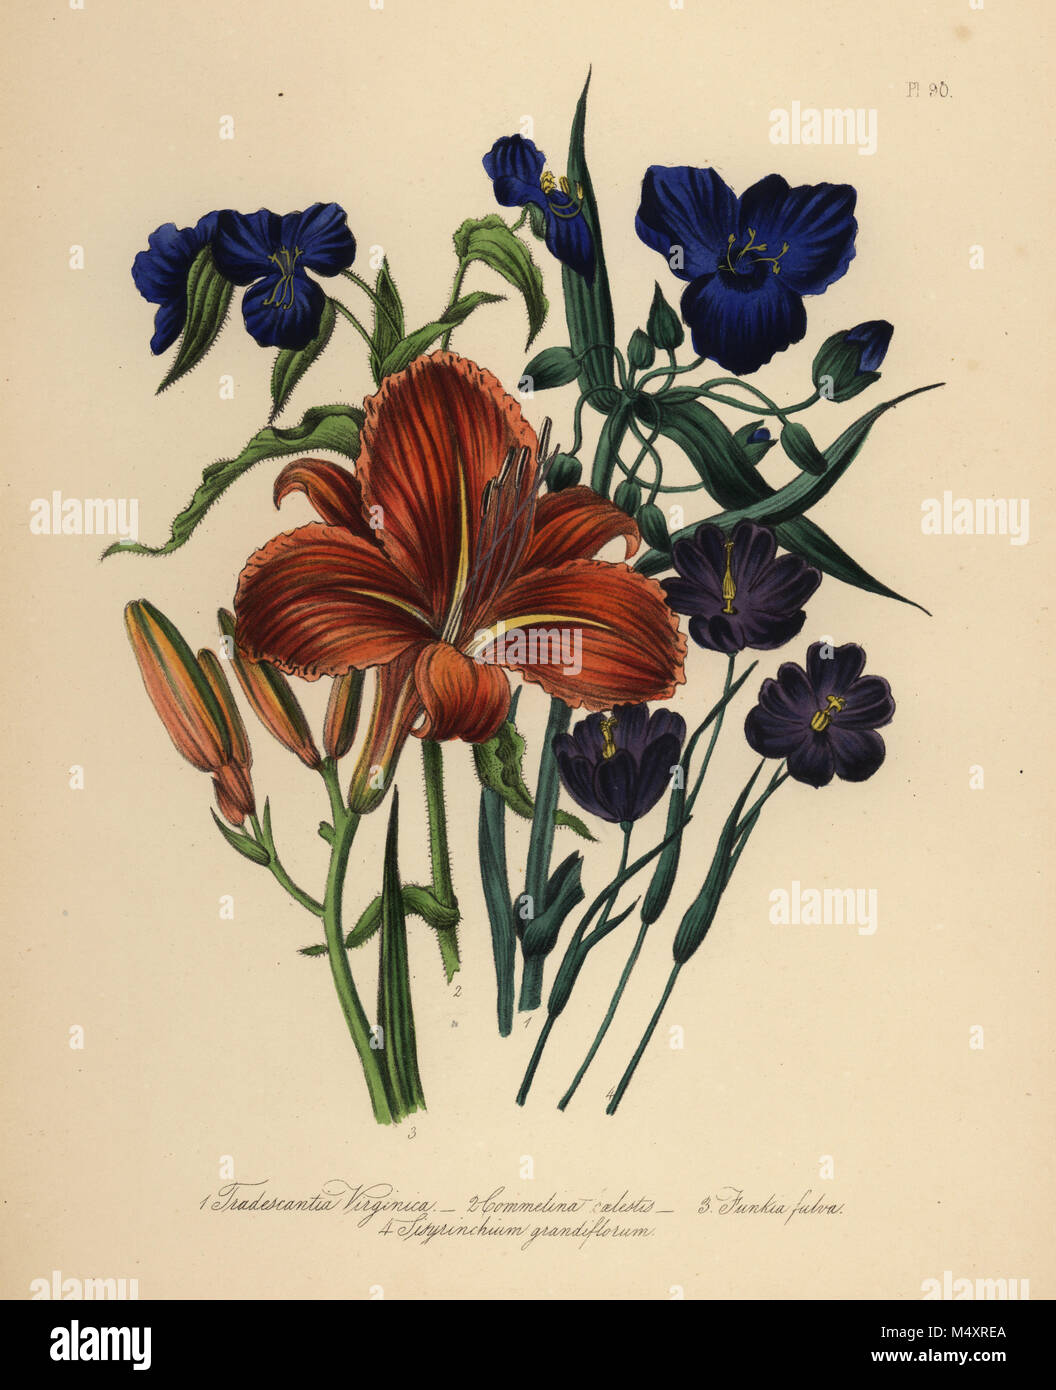 Common spiderwort, Tradescantia virginica, sky-blue commelin, Commelina caelestis, copper-coloured day lily, Funkia fulva, and large-flowered sisyrinchium, Sisyrinchium grandiflorum. Handfinished chromolithograph by Henry Noel Humphreys after an illustration by Jane Loudon from Mrs. Jane Loudon's Ladies Flower Garden of Ornamental Perennials, William S. Orr, London, 1849. Stock Photo